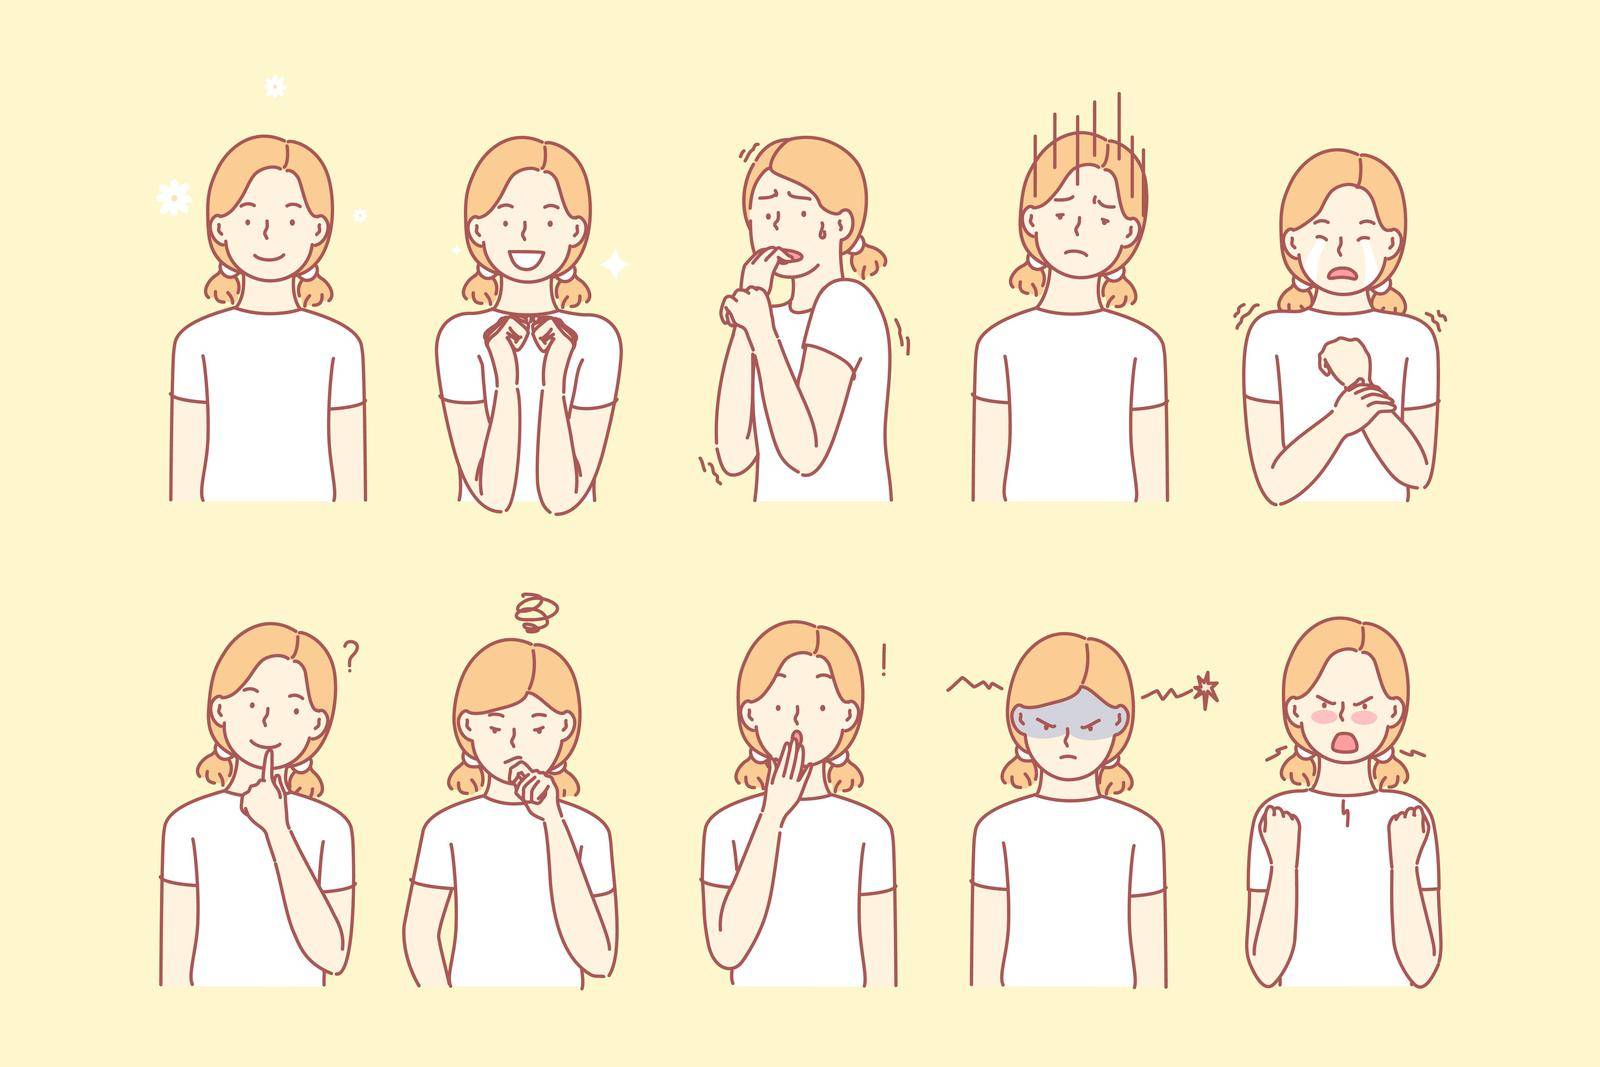 Childs emotions and facial expressions set concept. Illustration or collection showing different emotions of girl. Girl demonstrates of positive and negative facial expressions. Simple flat vector